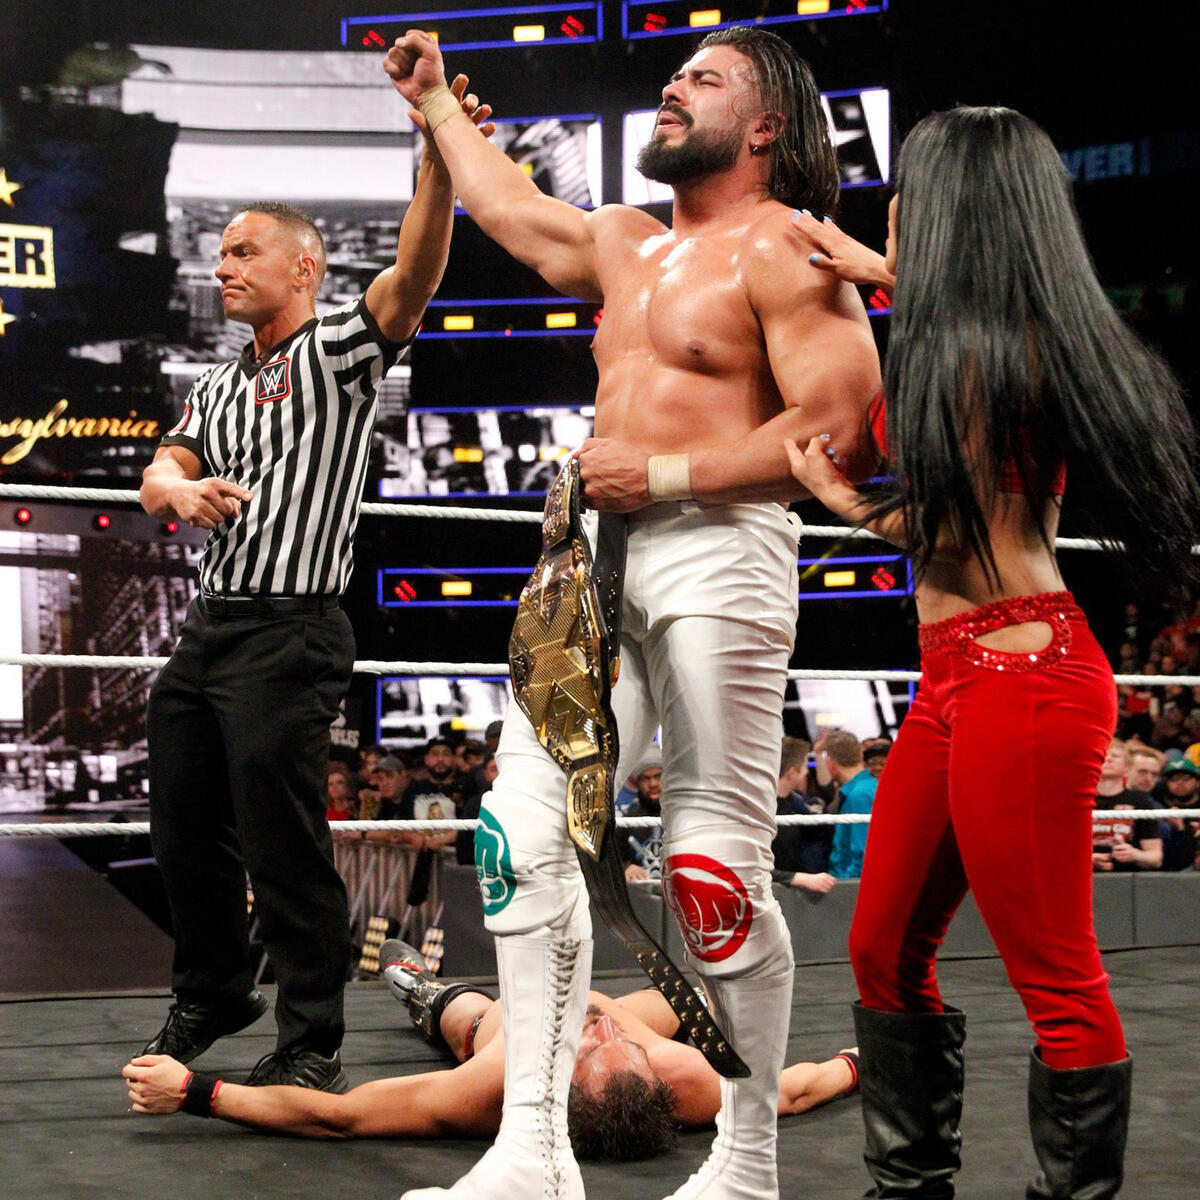 After hitting the hammerlock DDT on Gargano, Almas and Vega celebrate his NXT Championship victory.